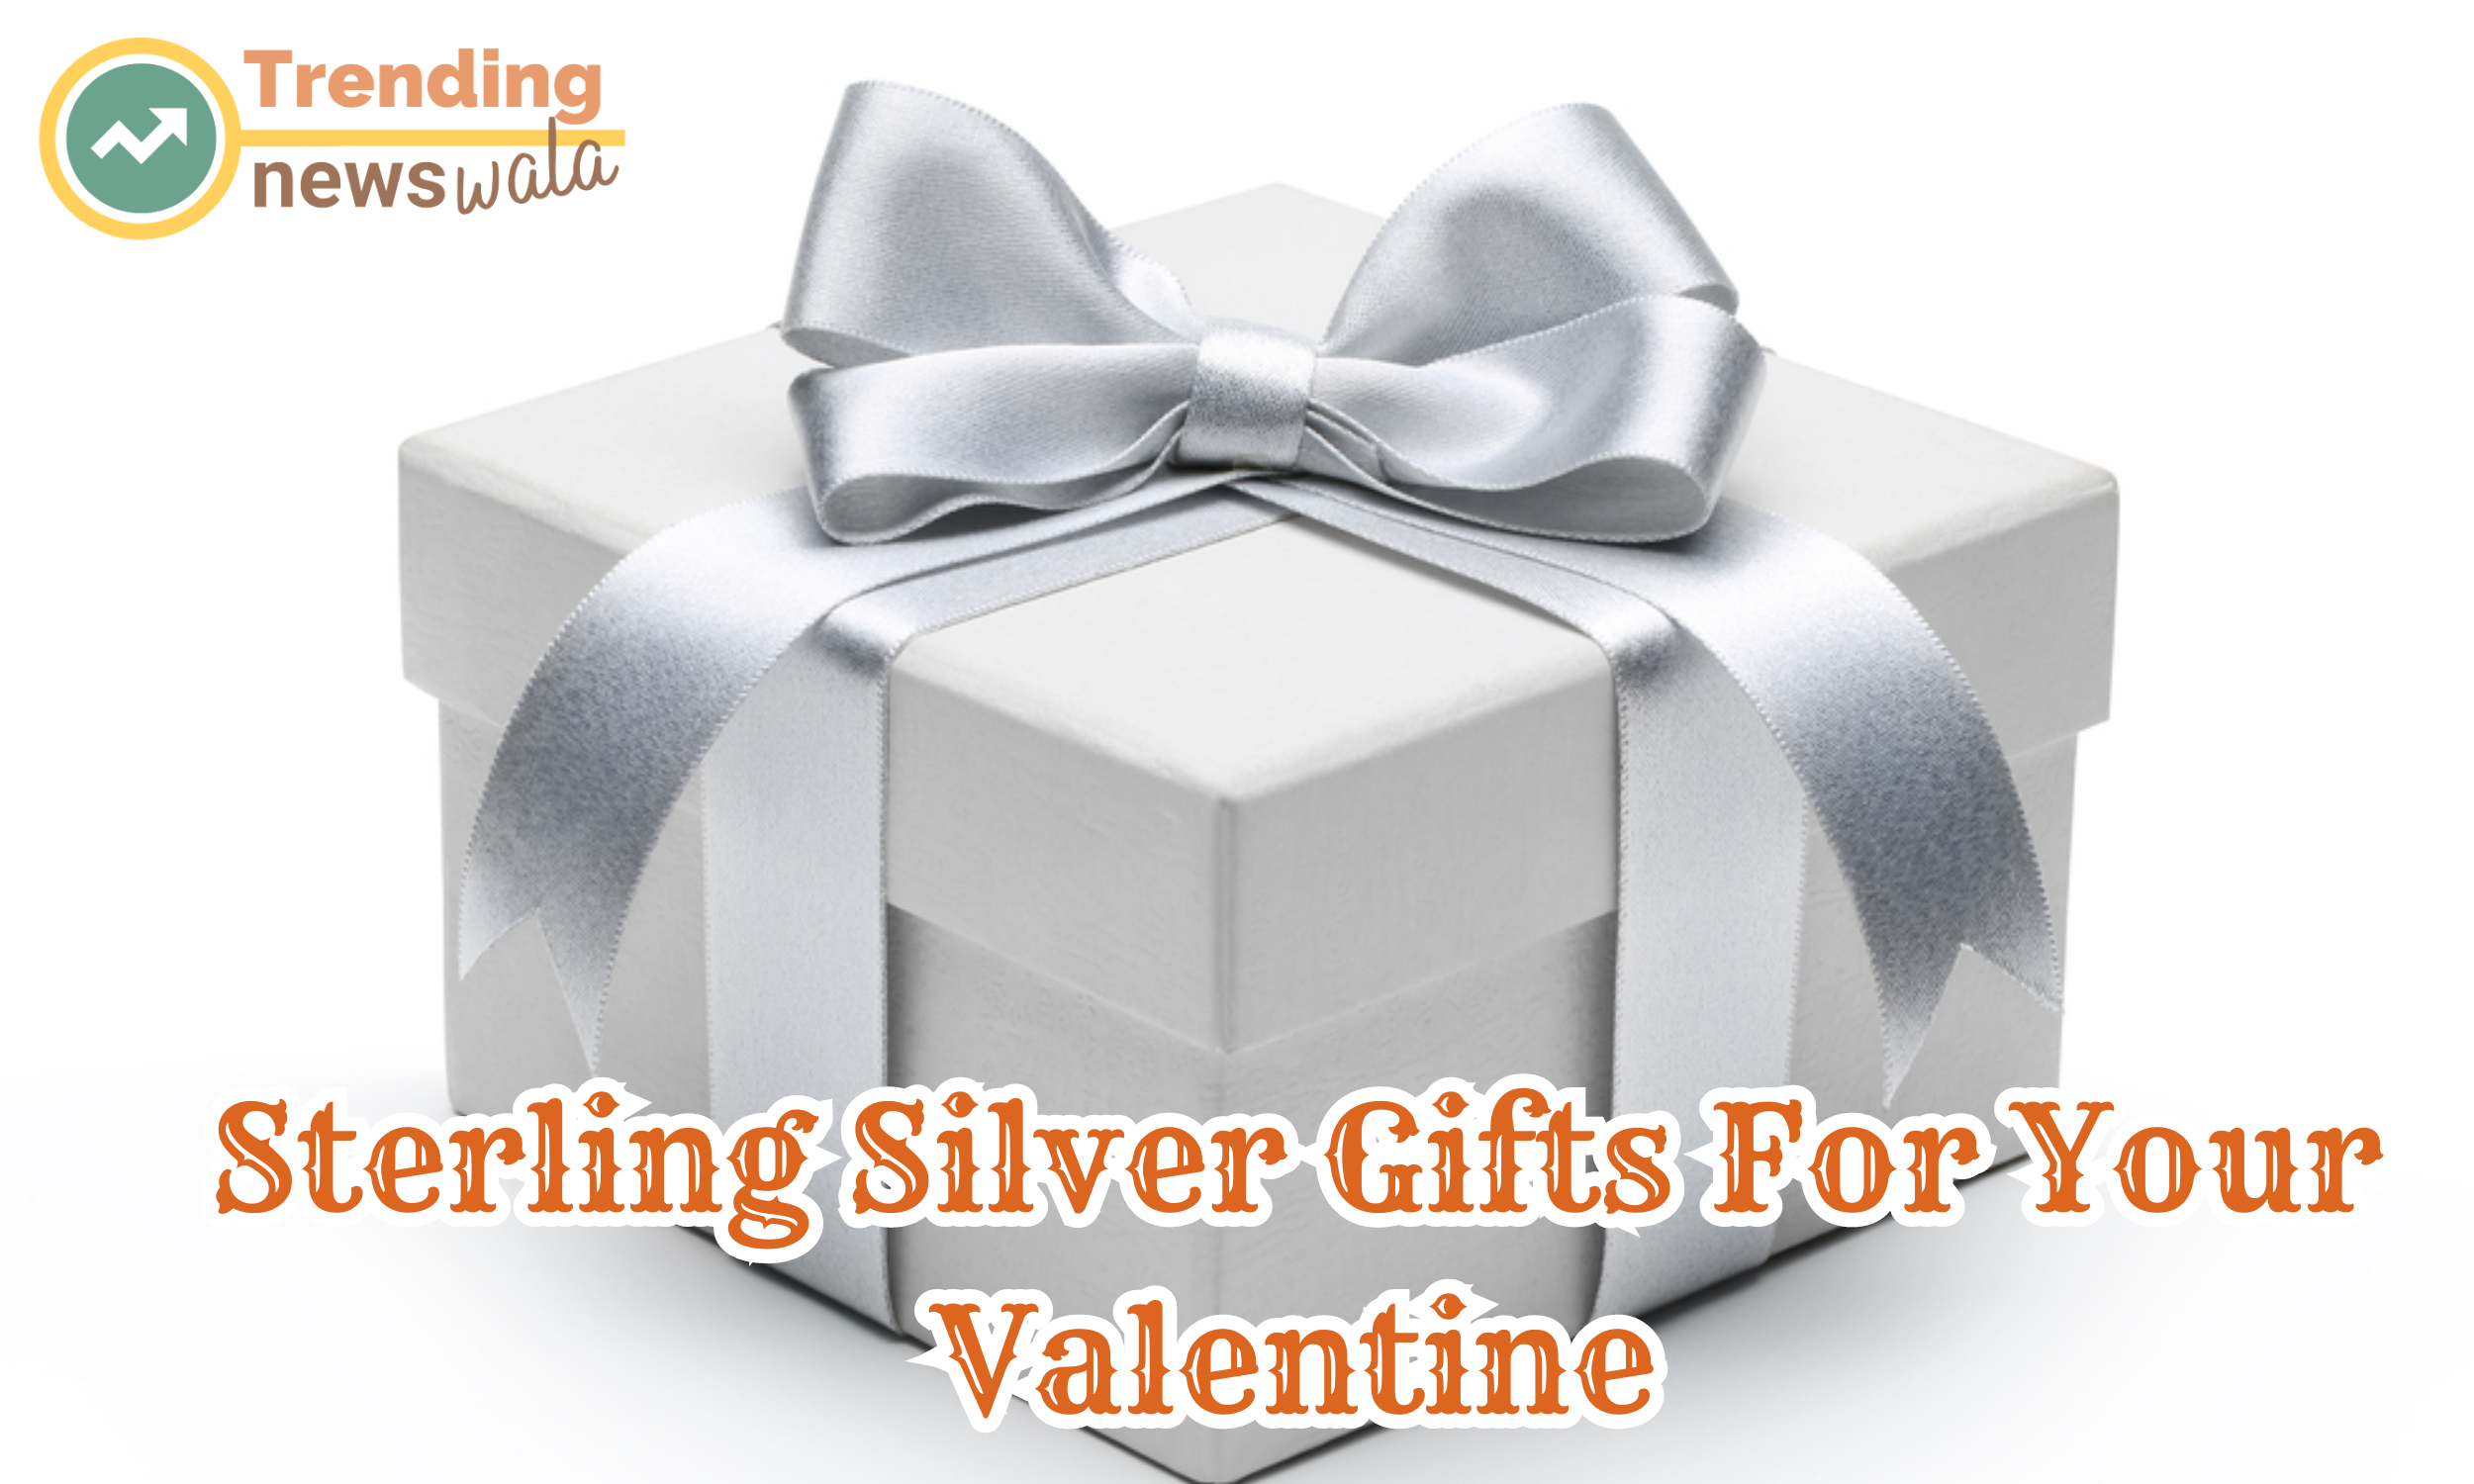 Sterling silver gifts for your Valentine offer a perfect blend of elegance